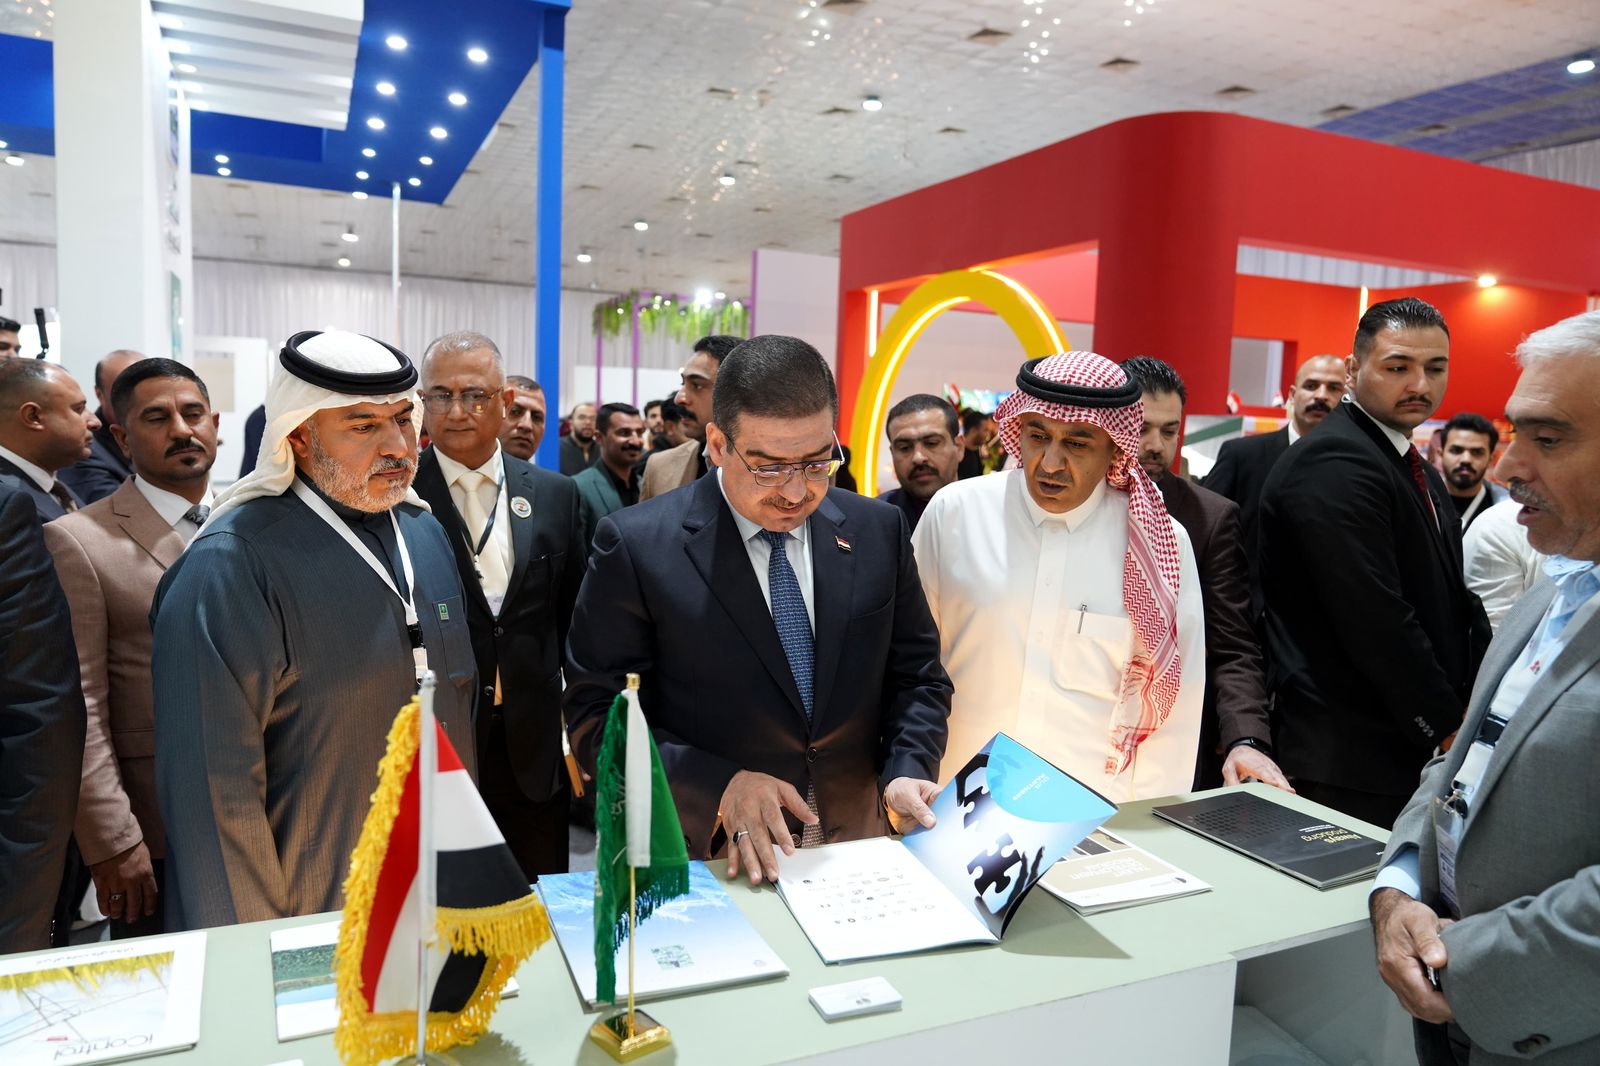 Minister - Baghdad International Fair achieved many partnership contracts with Iraqi and international sectors